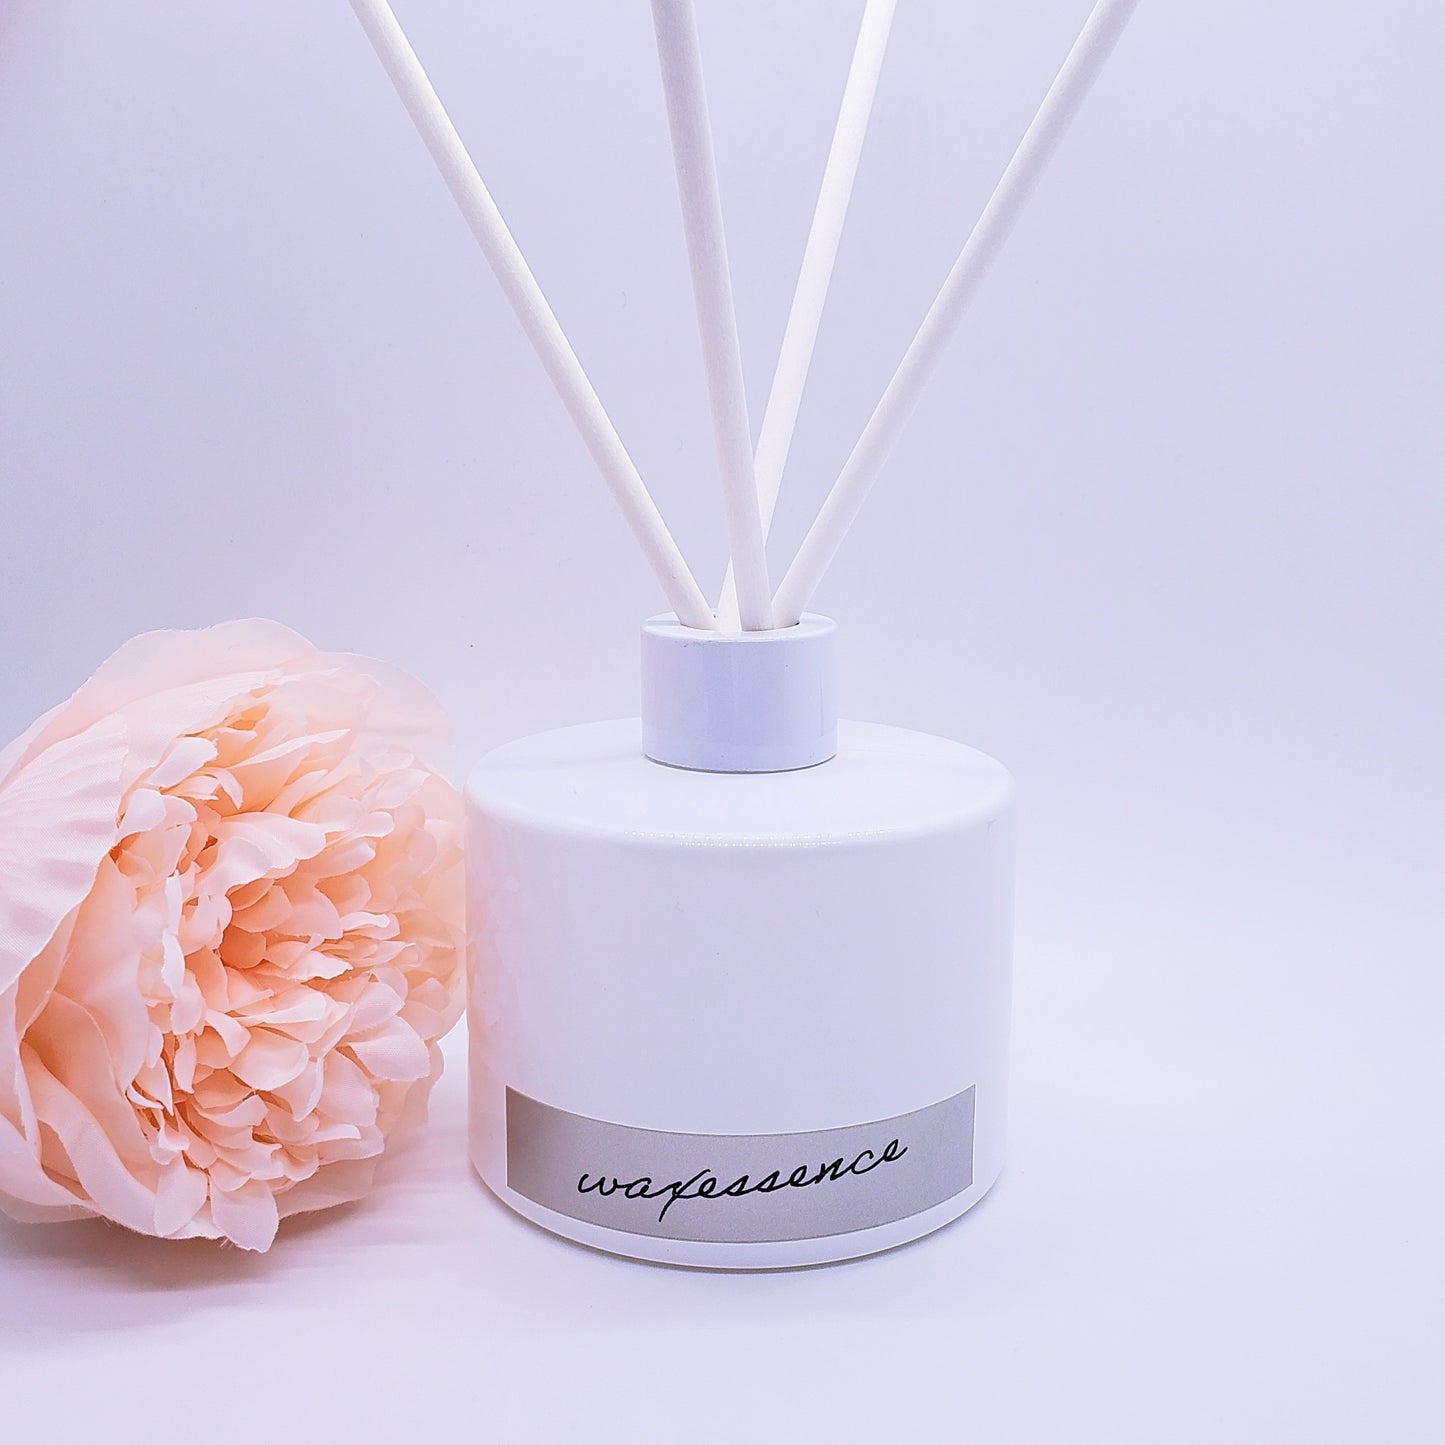 Reed Diffusers | Essenza - Gloss White | Scented Room Fragrance | White Diffuser Bottle | Aromatherapy Home Decor | Essential Oil Diffuser